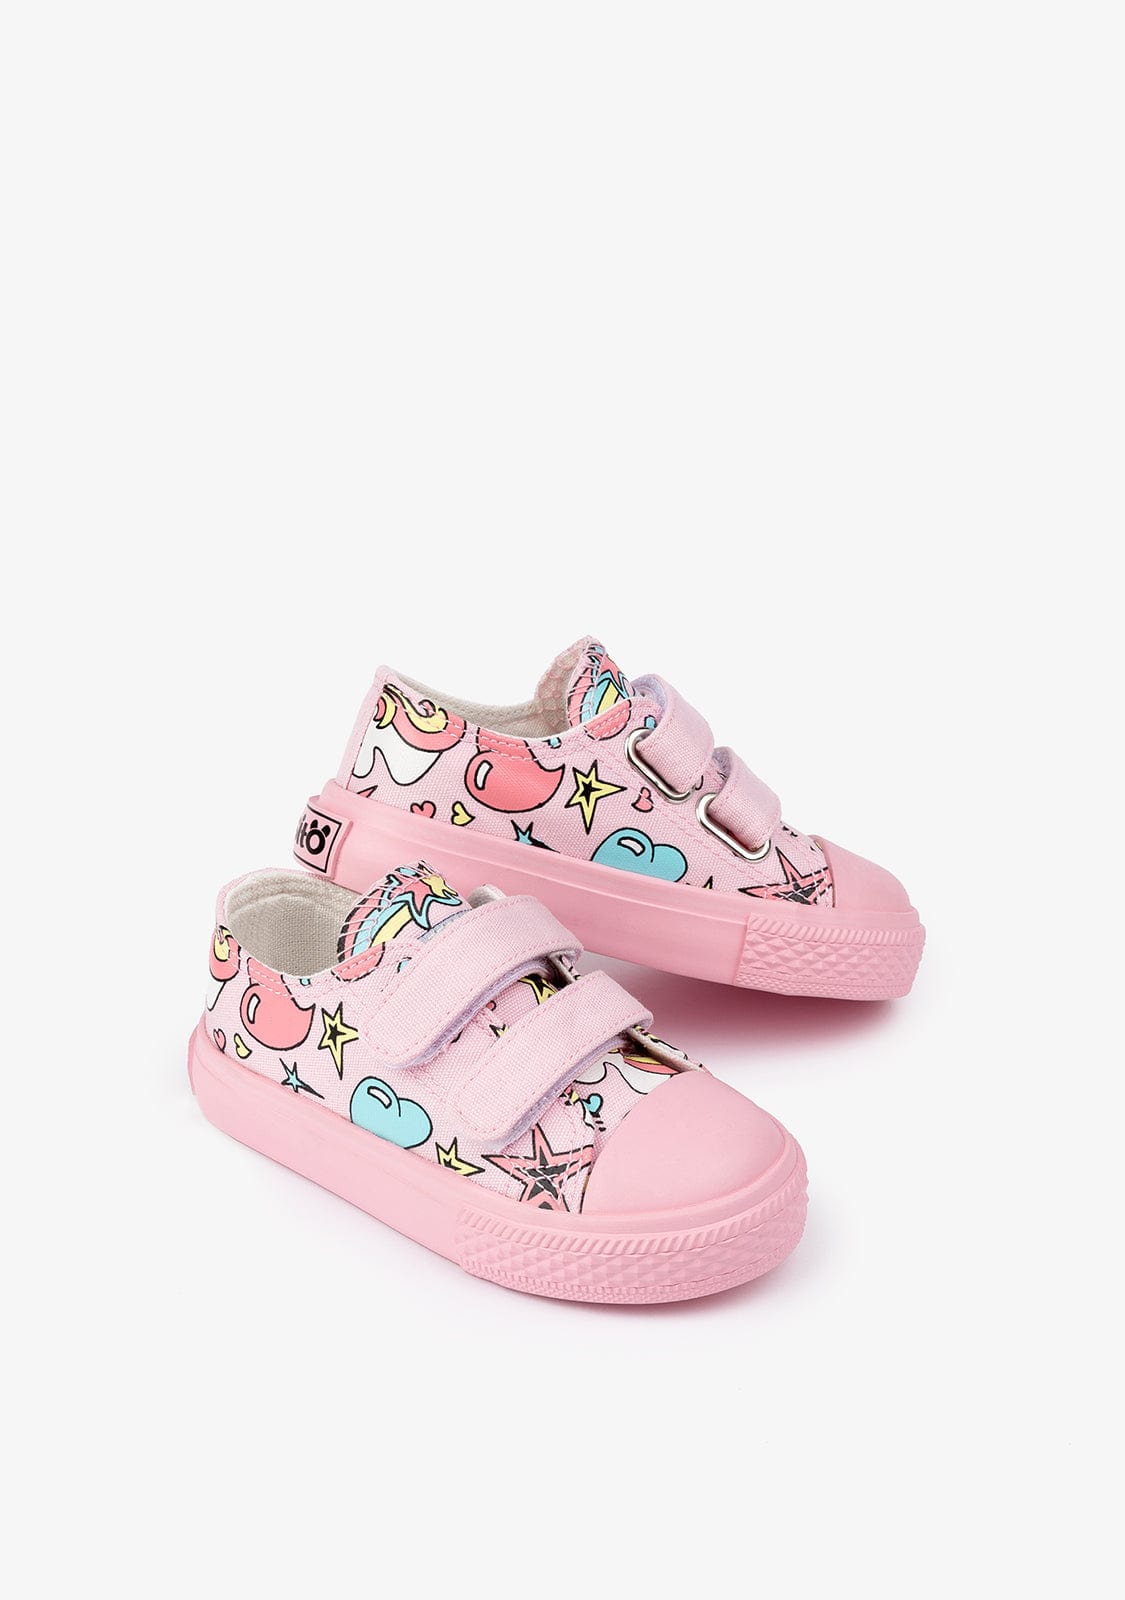 OSITO Shoes Baby's Pink Unicorn Sneakers